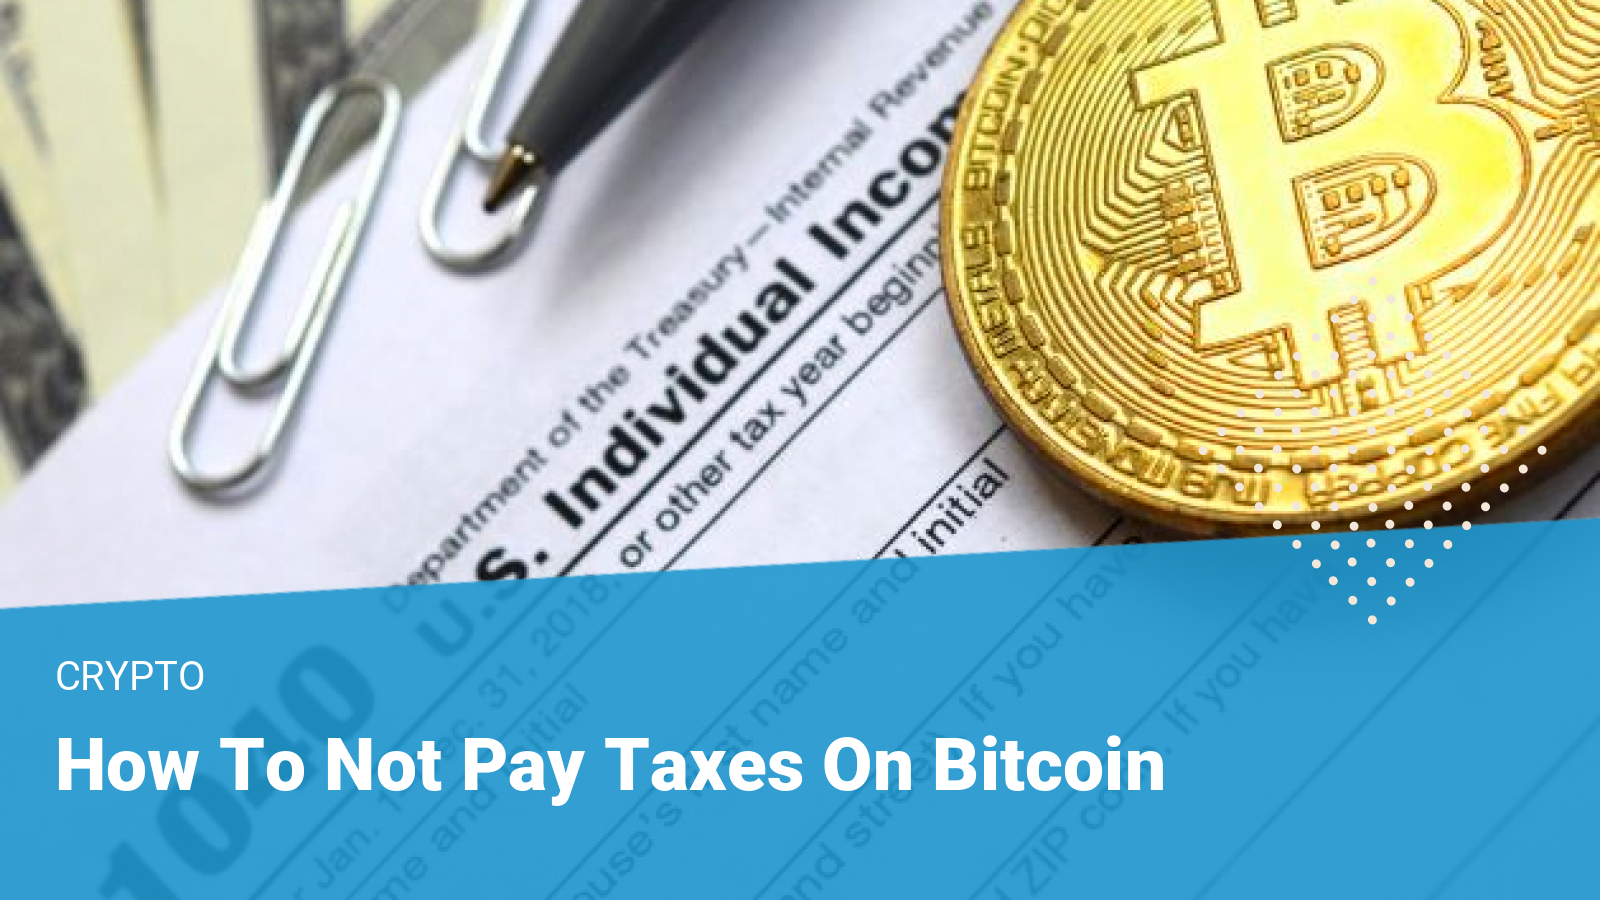 Cryptocurrency Taxes: A Guide To Tax Rules For Bitcoin, Ethereum And More | Bankrate